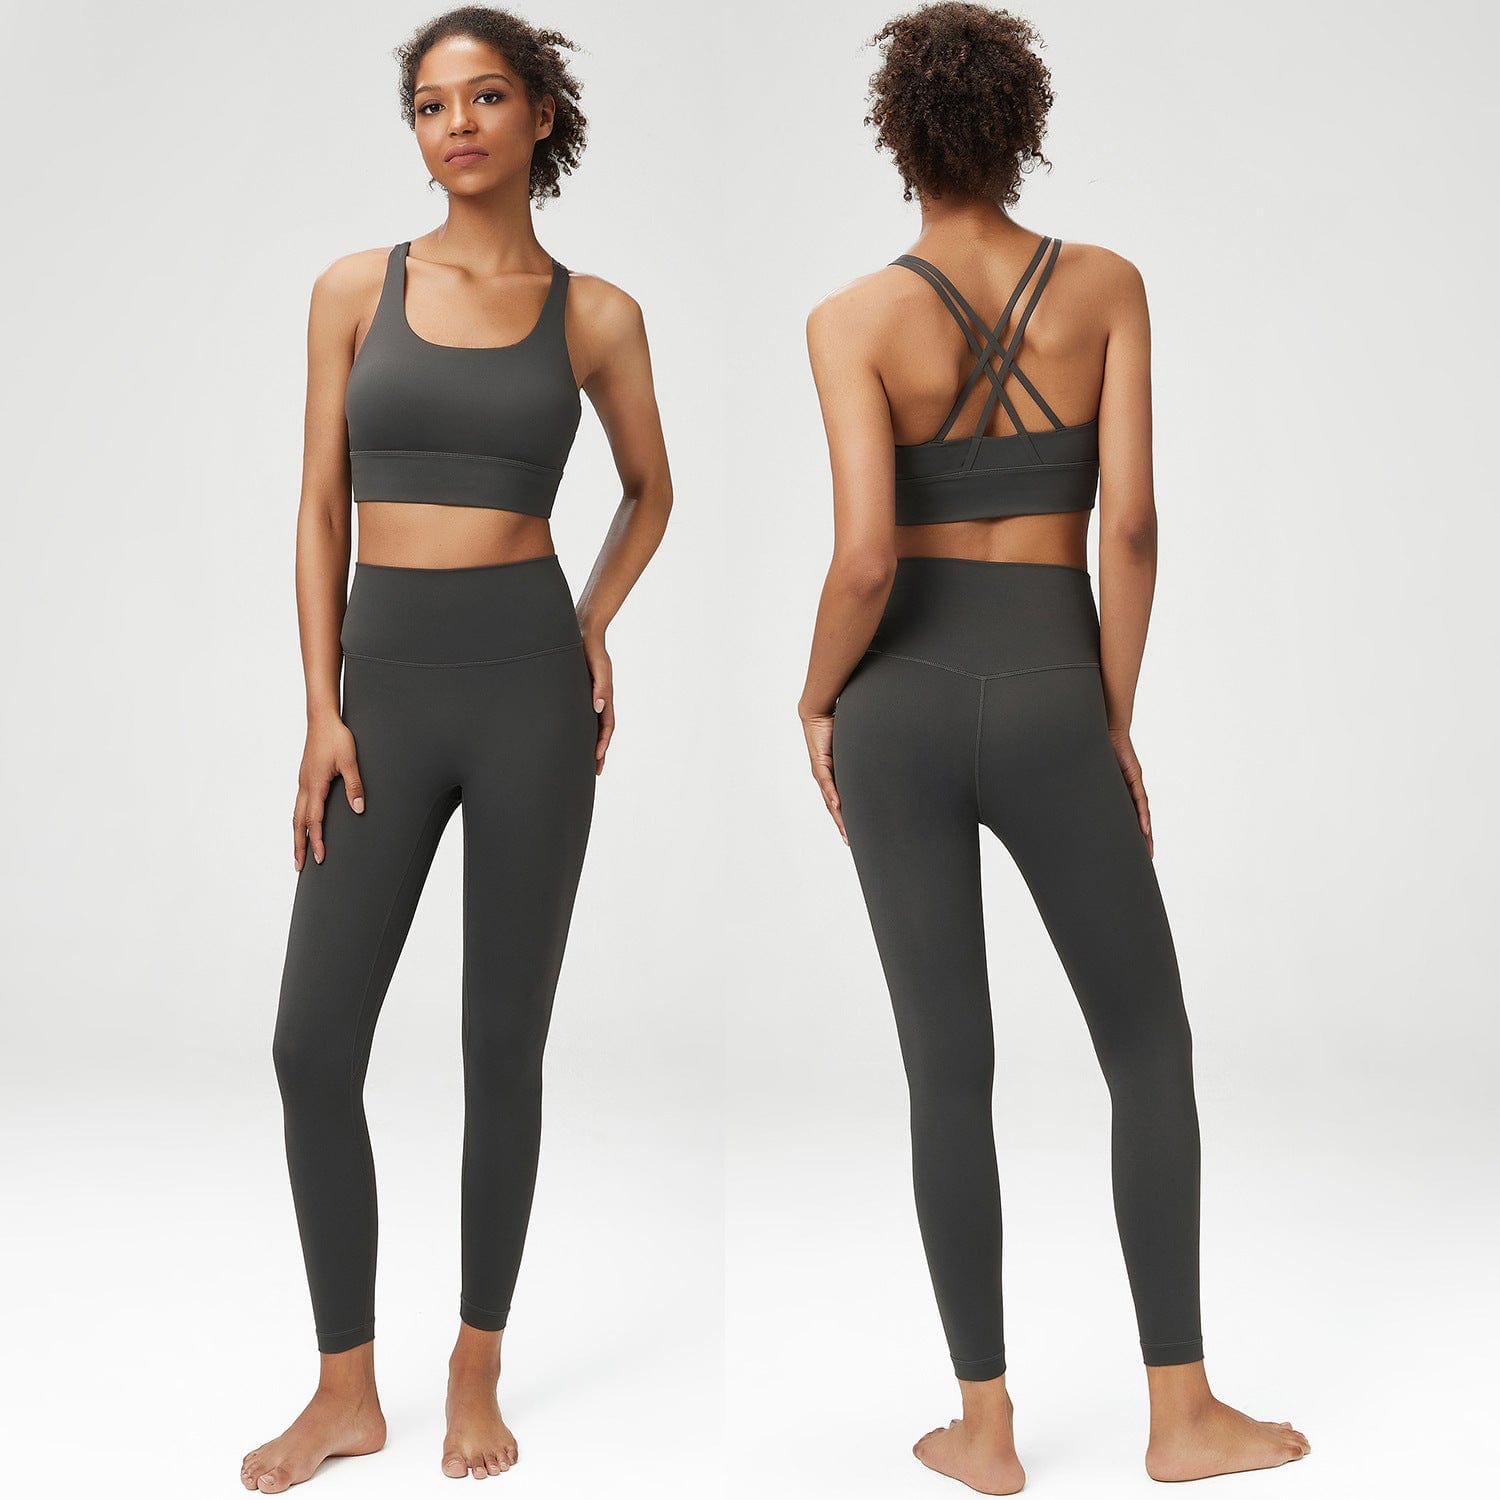 SqueezMeSkinny New! Lycra Classic Yoga Set for Women - Sporty and Fit Compression Workout Set